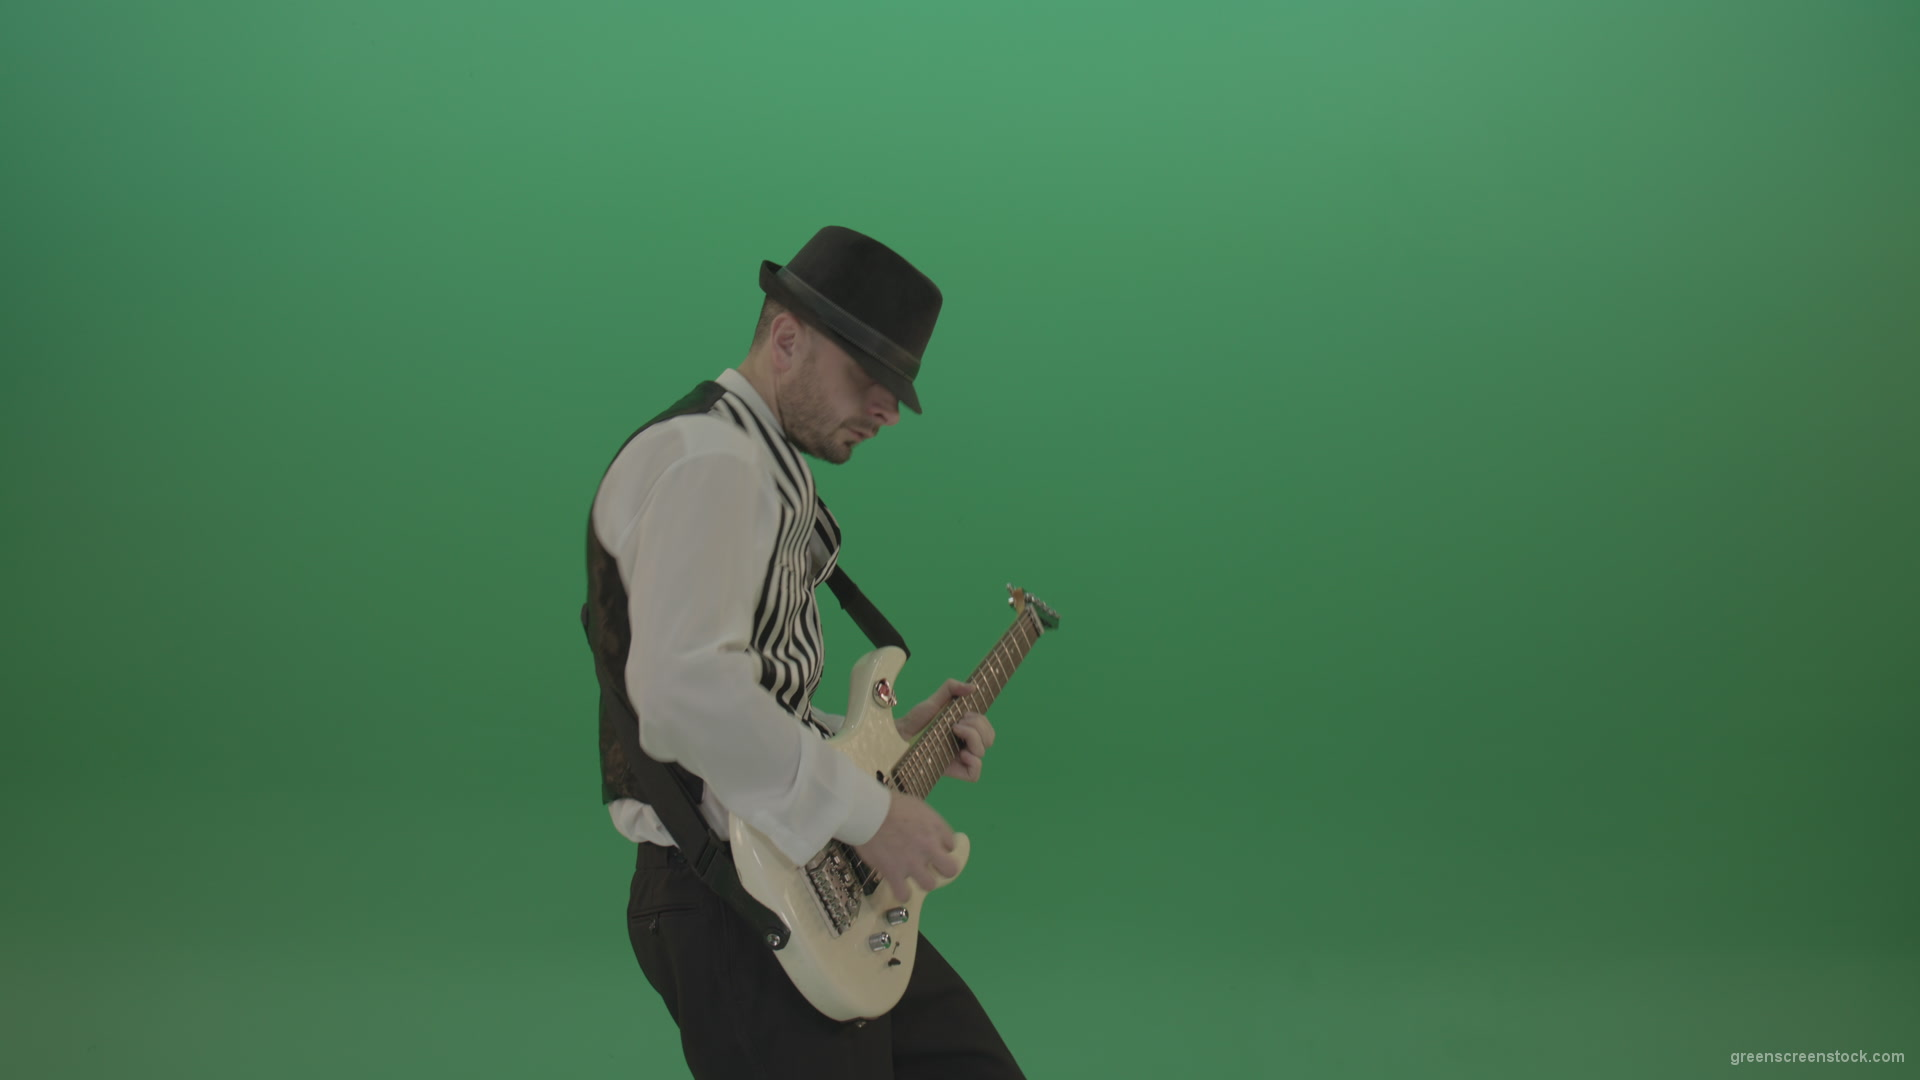 Classic-jazz-guitarist-play-white-electro-guitar-solo-music-on-green-screen_007 Green Screen Stock